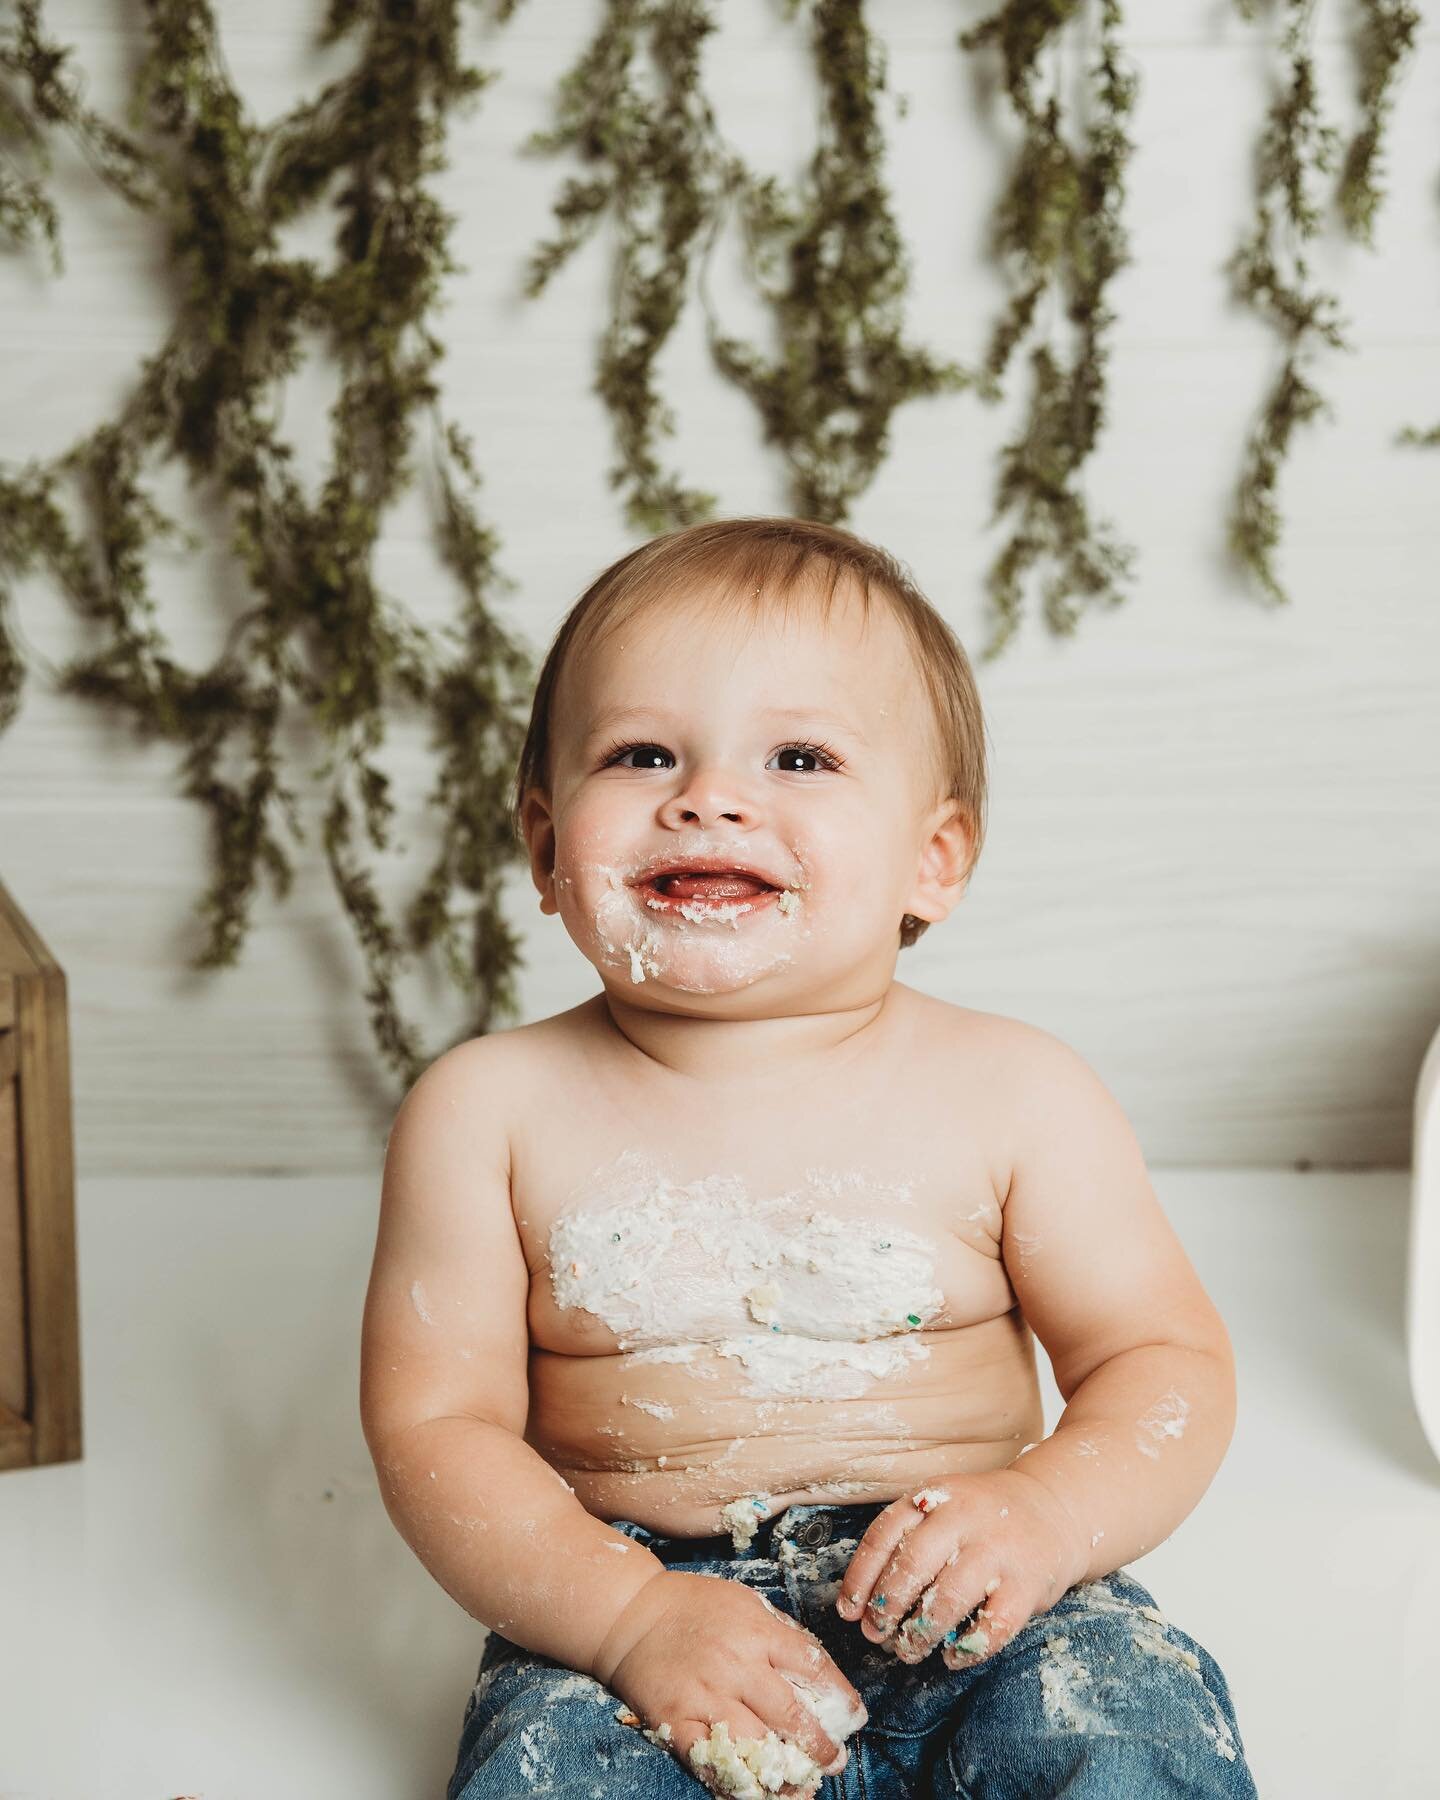 Hey sometimes eating cake involves more than just eating sometimes it involves tummy rolls, tears, and giggles. 🍰🎈 

I mean come on does it get any cuter than this?
:
:
:
:
:
:
#elpasophotographer #elpasophotographers #elpasophotostudio #elpasocake